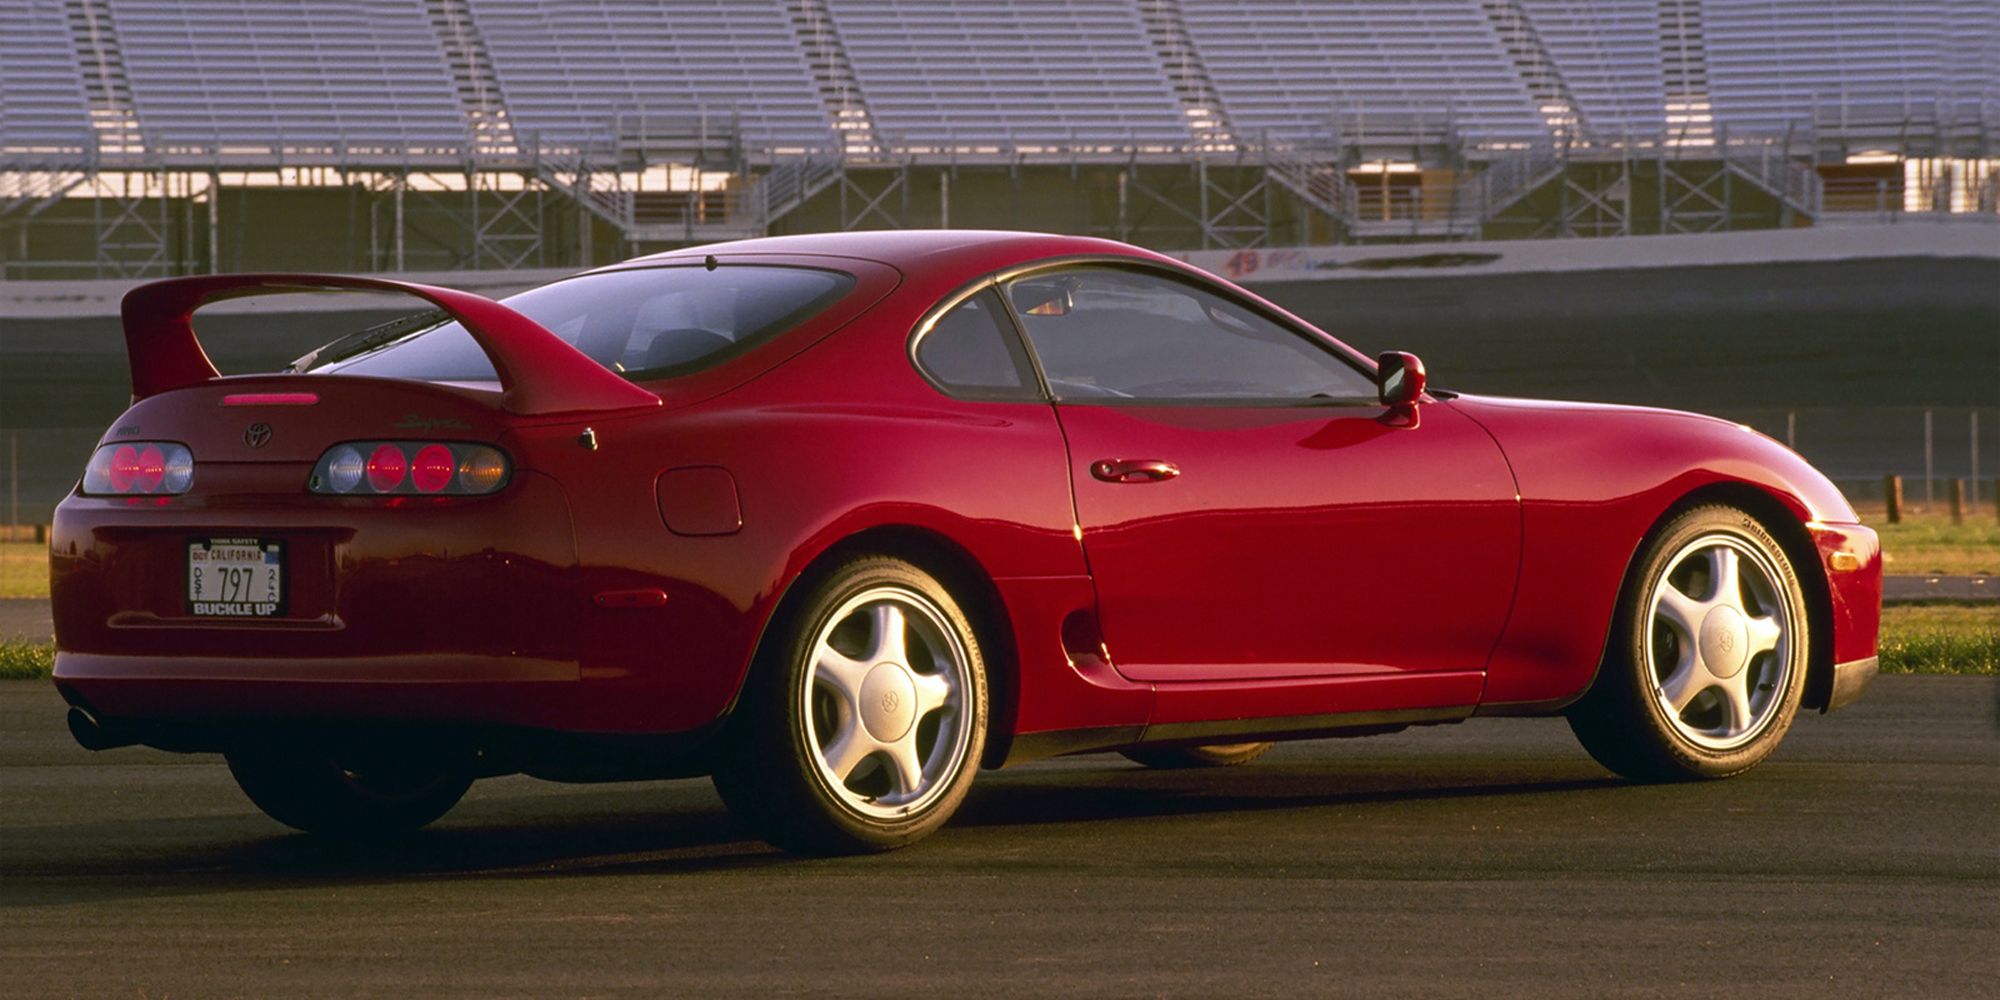 Rear 3/4 view of a red Supra Mk4 